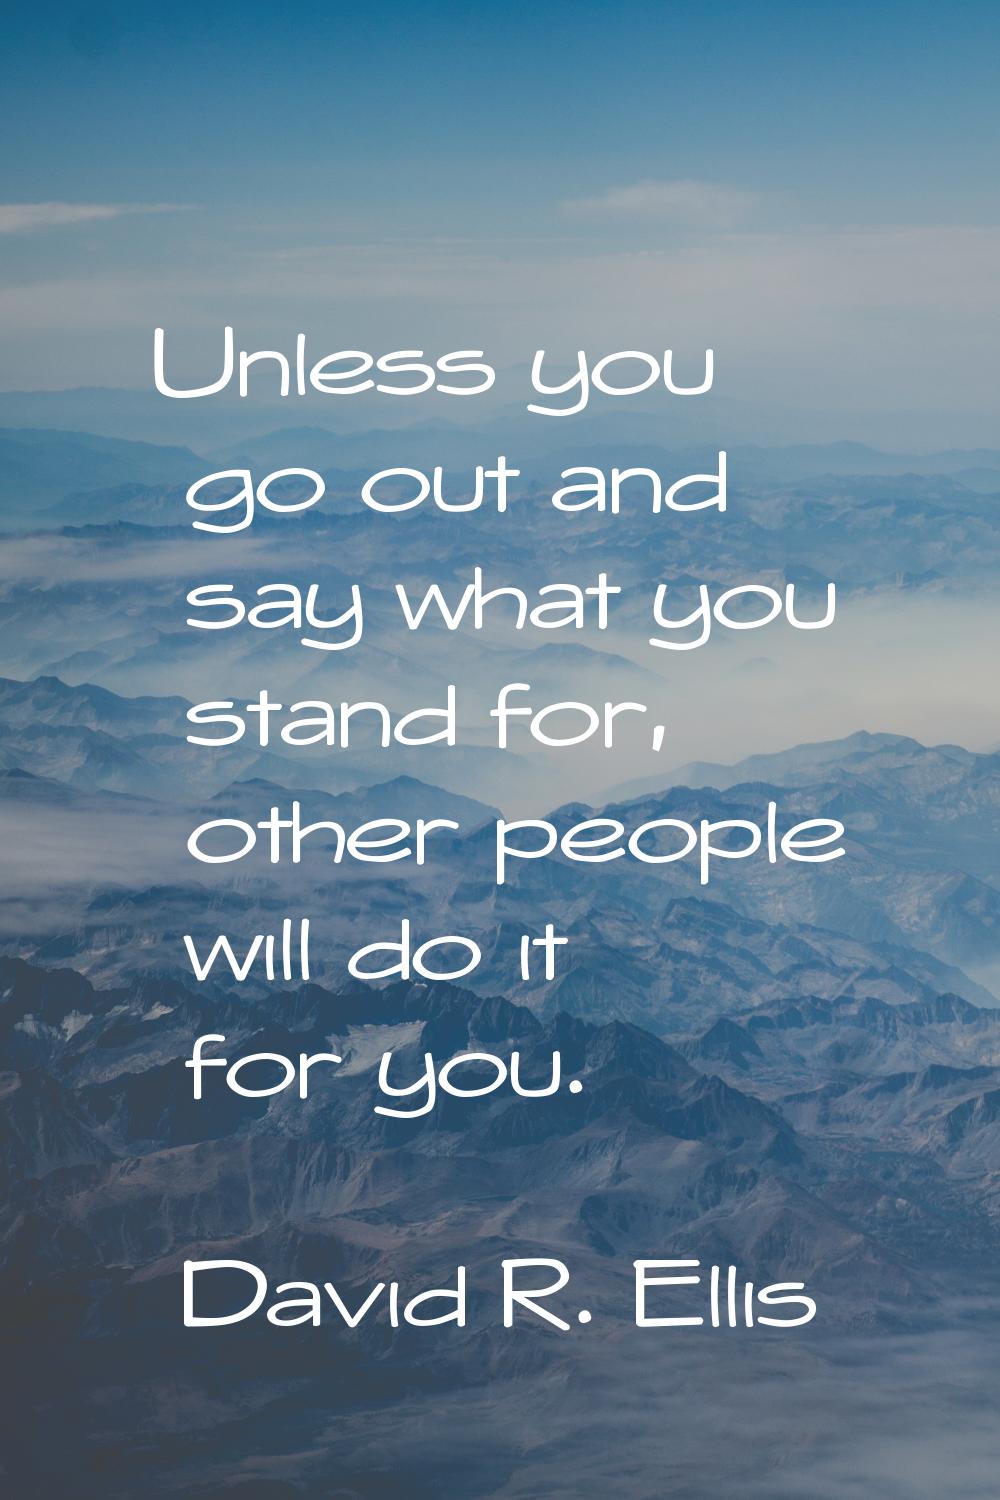 Unless you go out and say what you stand for, other people will do it for you.